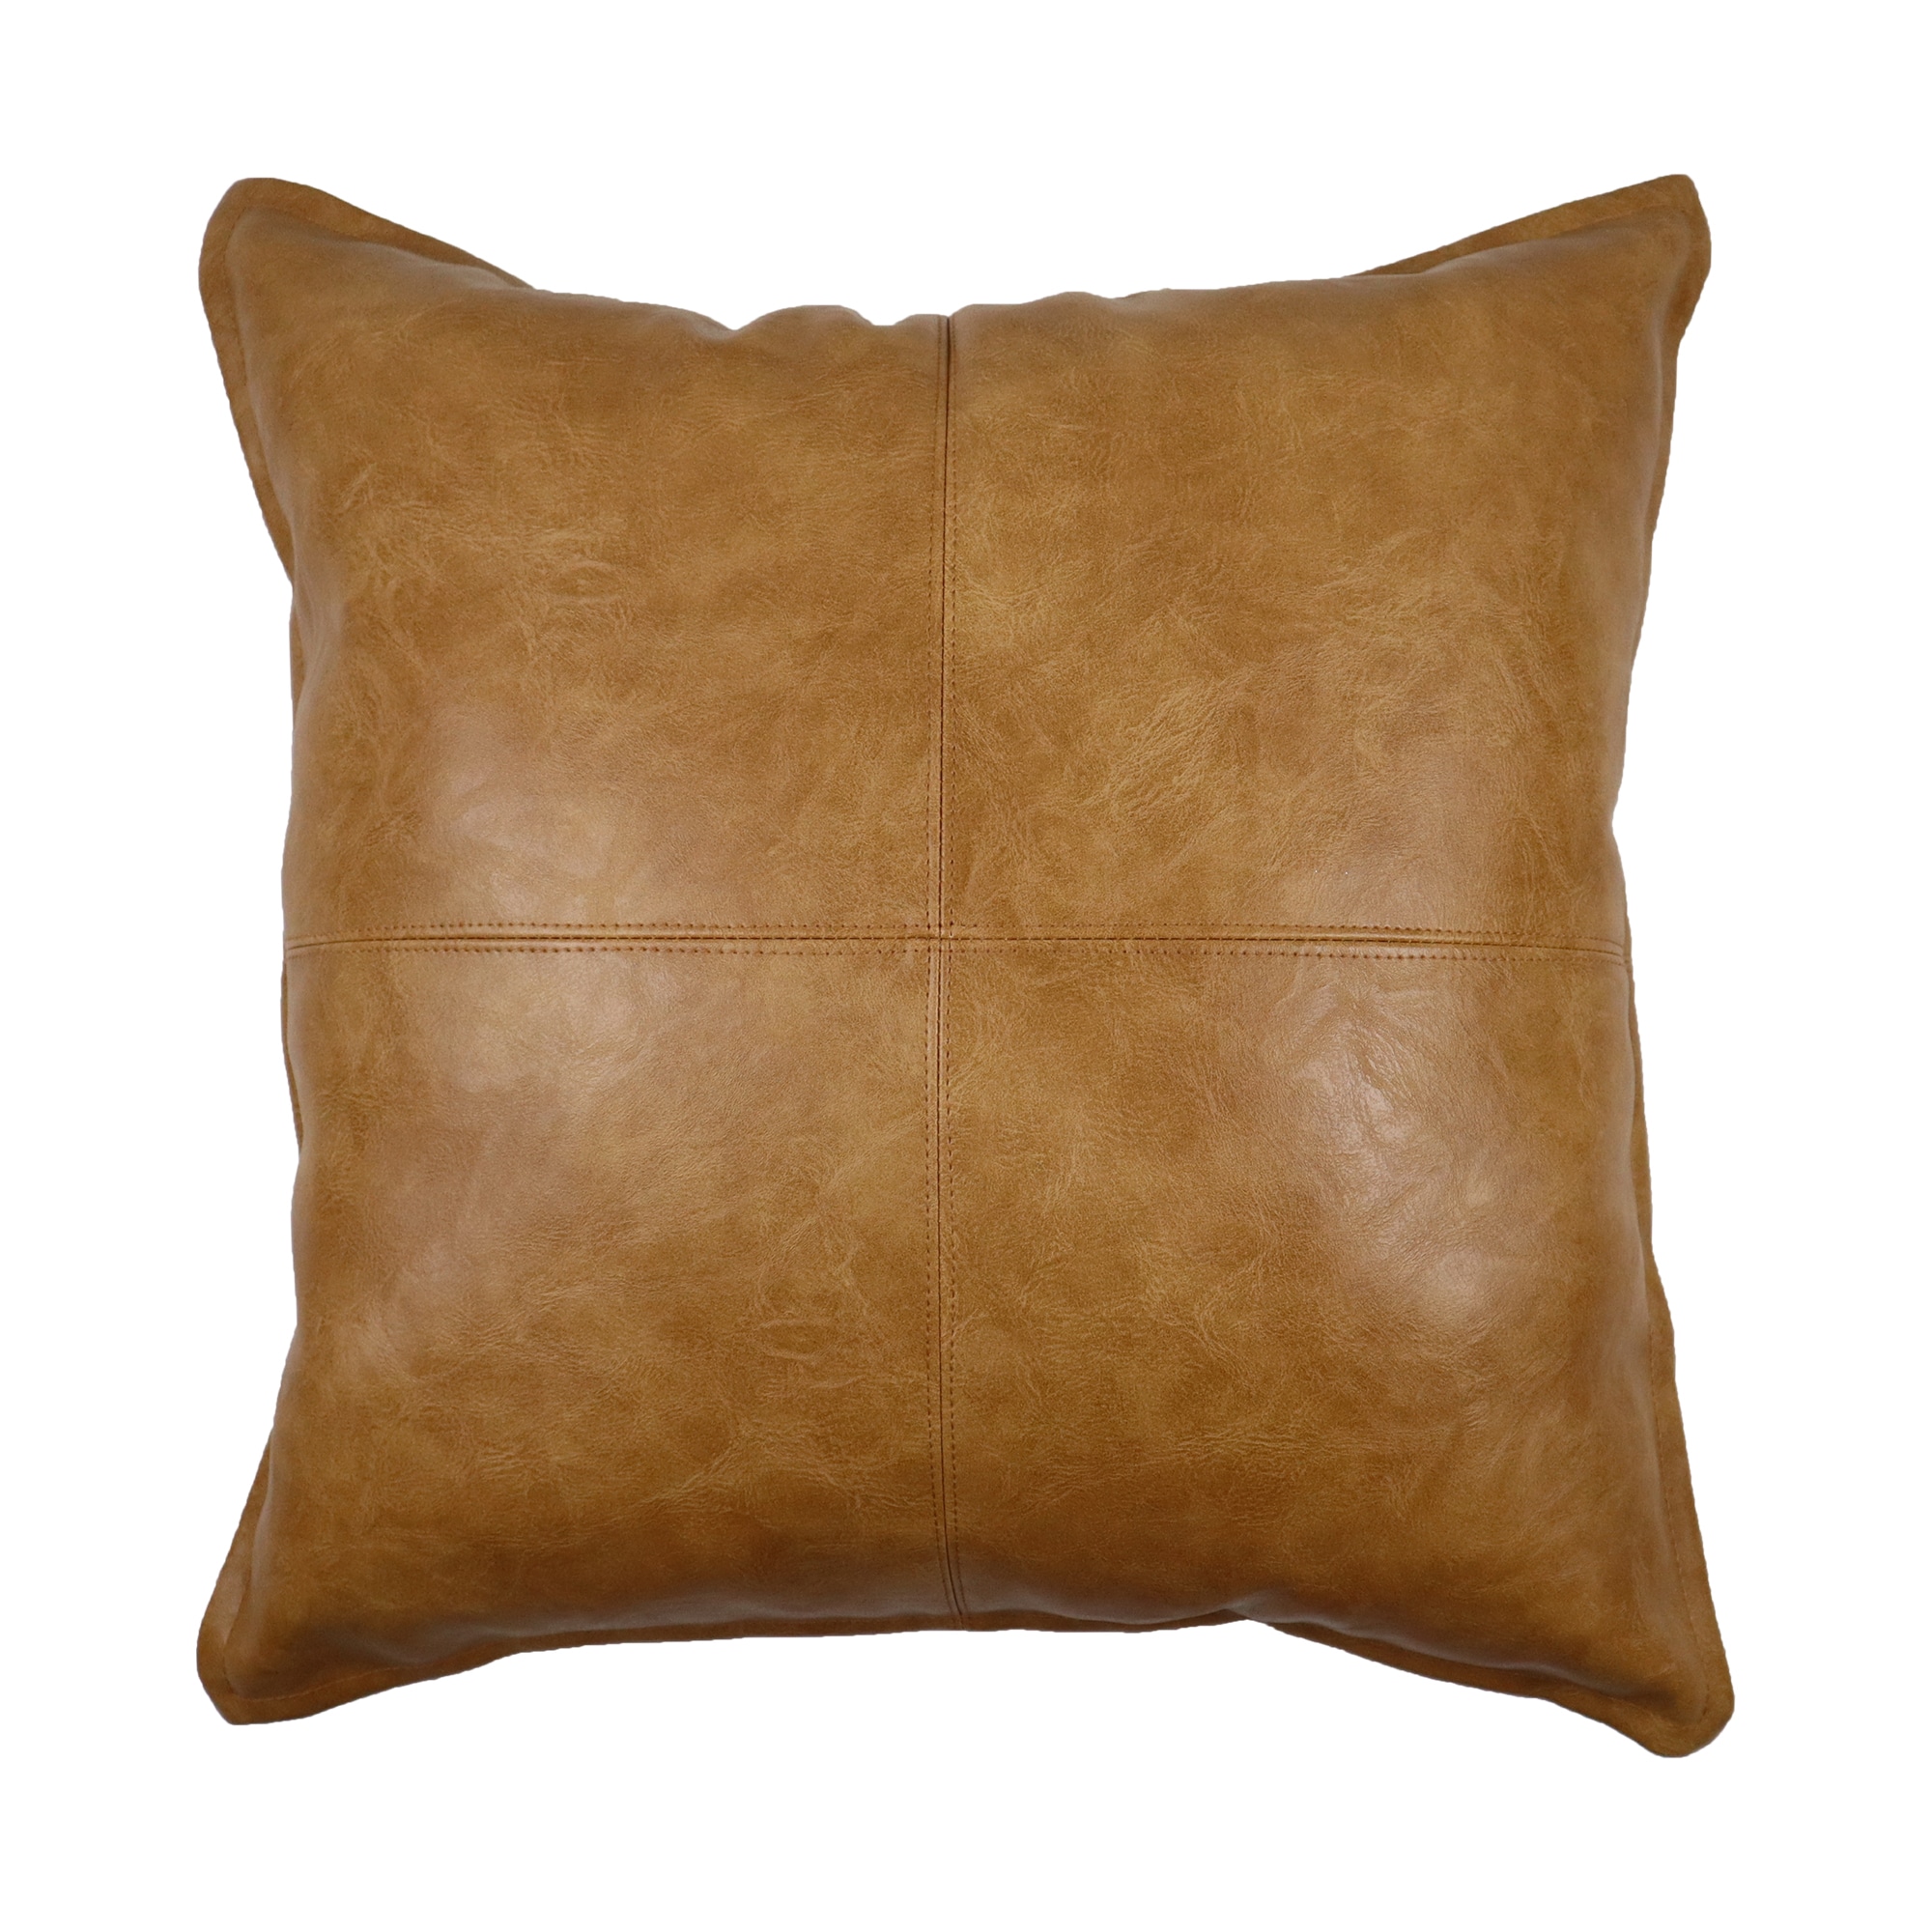 allen + roth Throw Pillows at Lowes.com